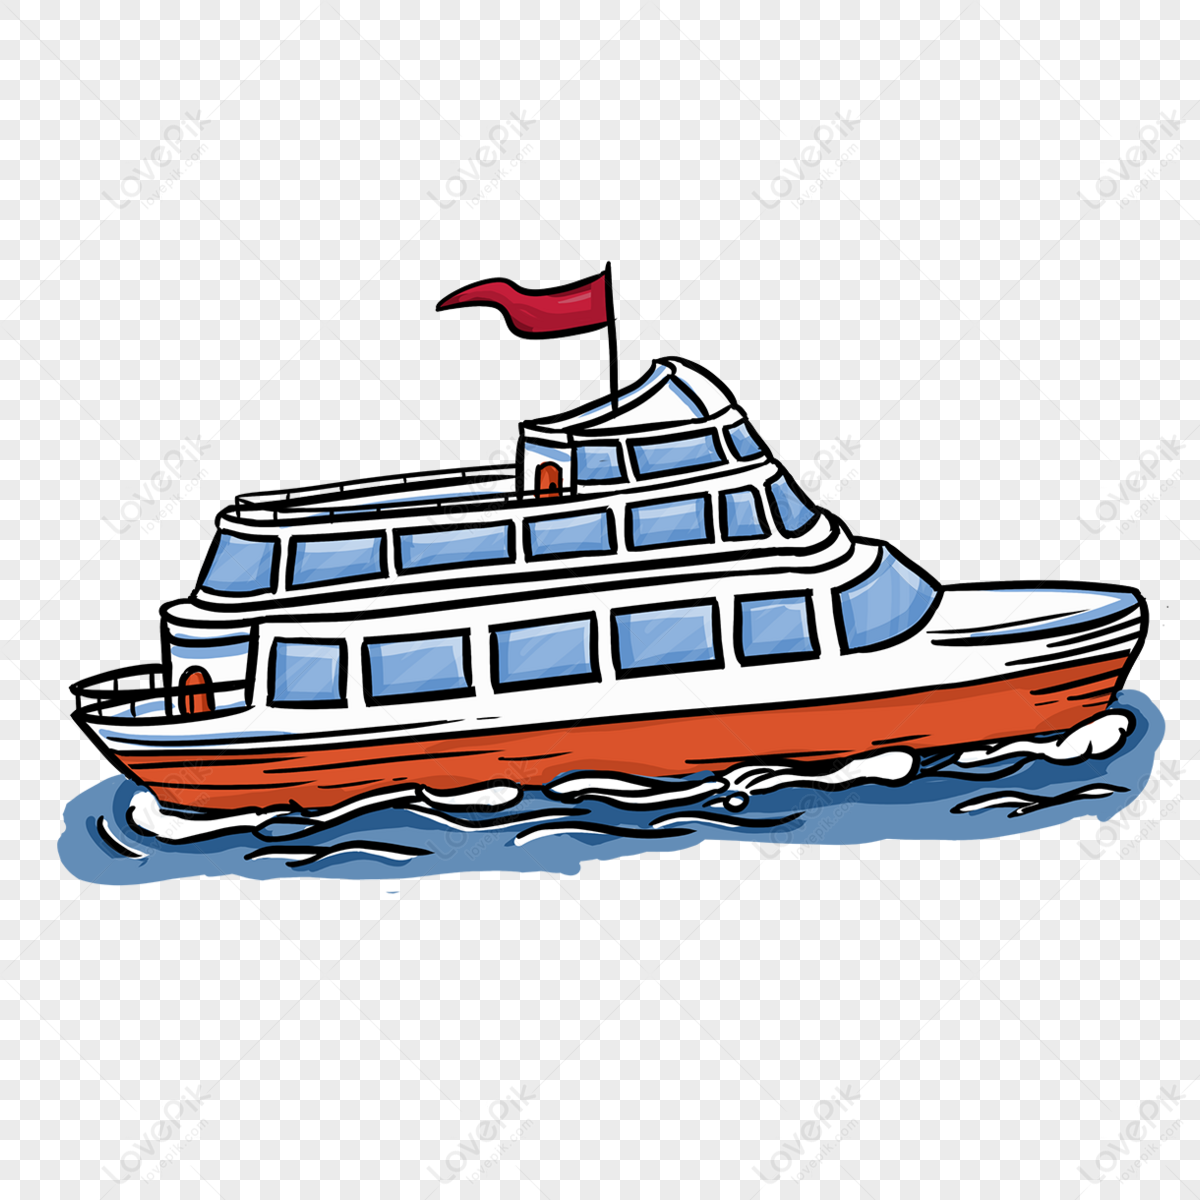 Cartoon style clipart red steamer cruise ship,mail ship,cruises png picture